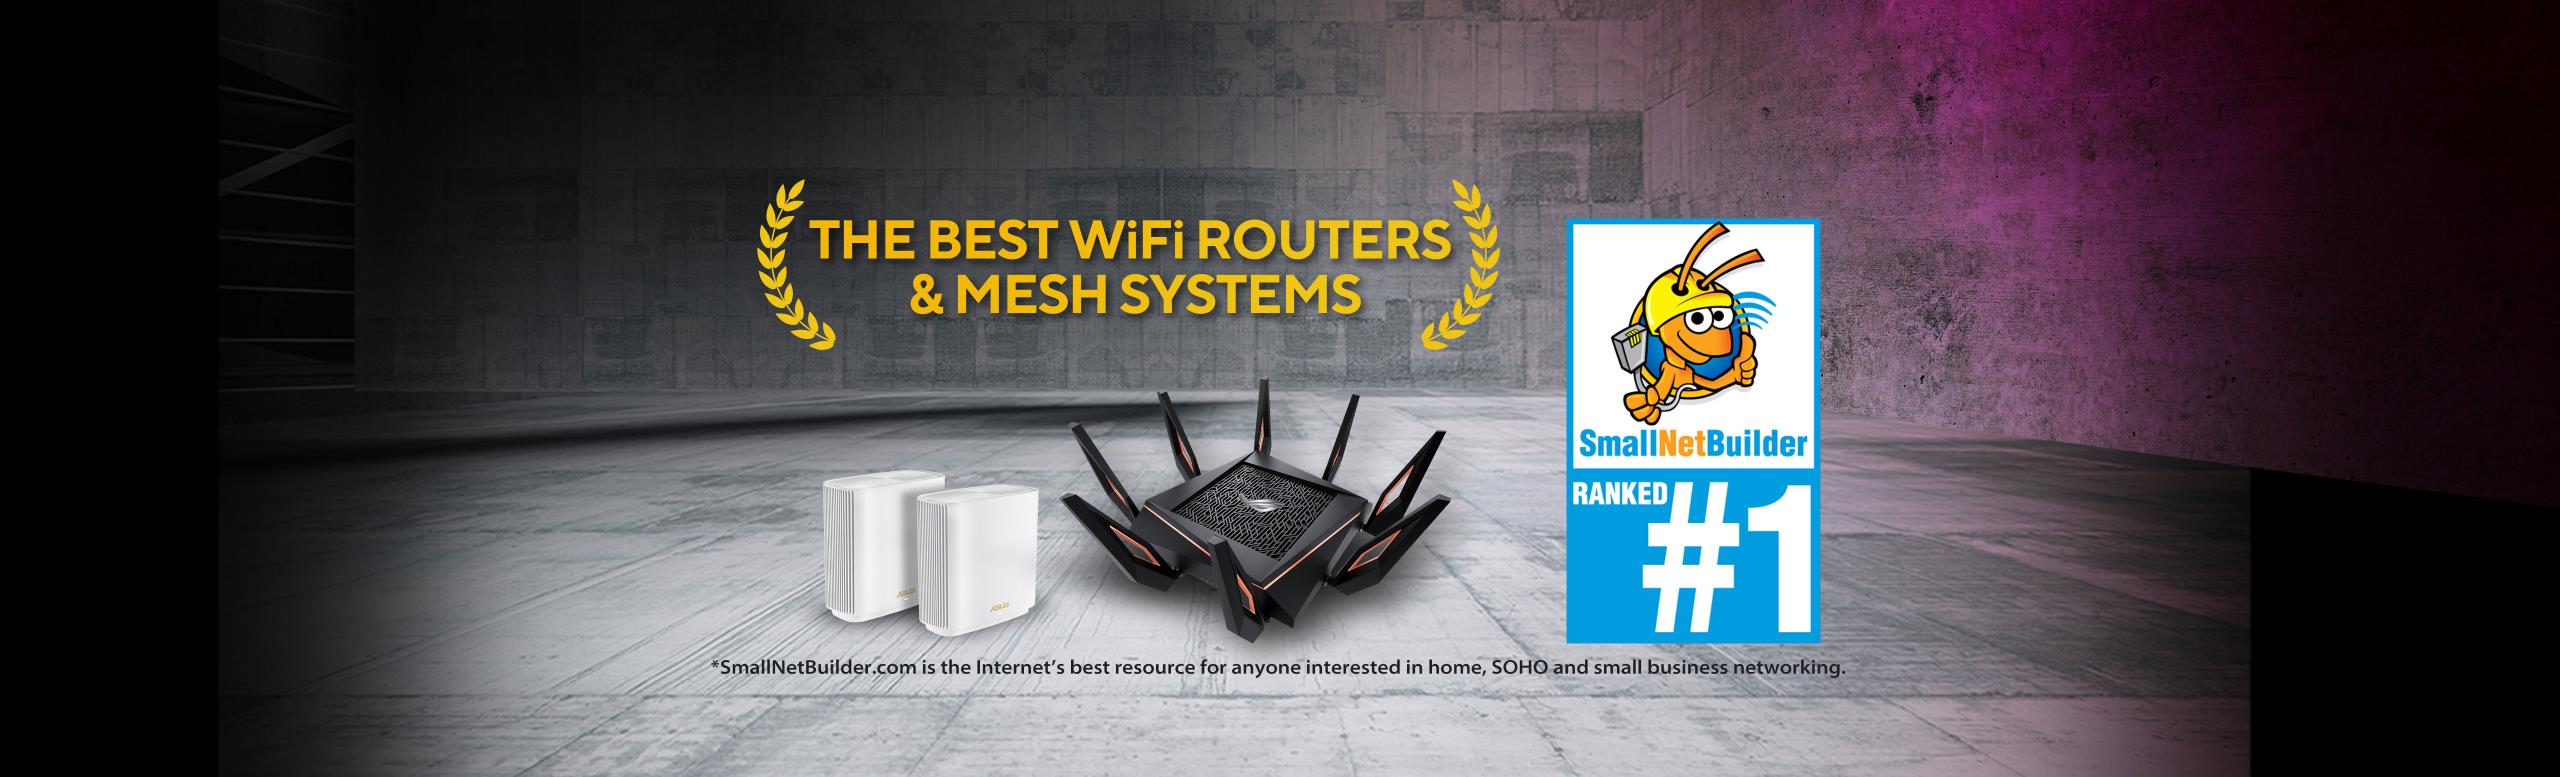 WiFi-Routers